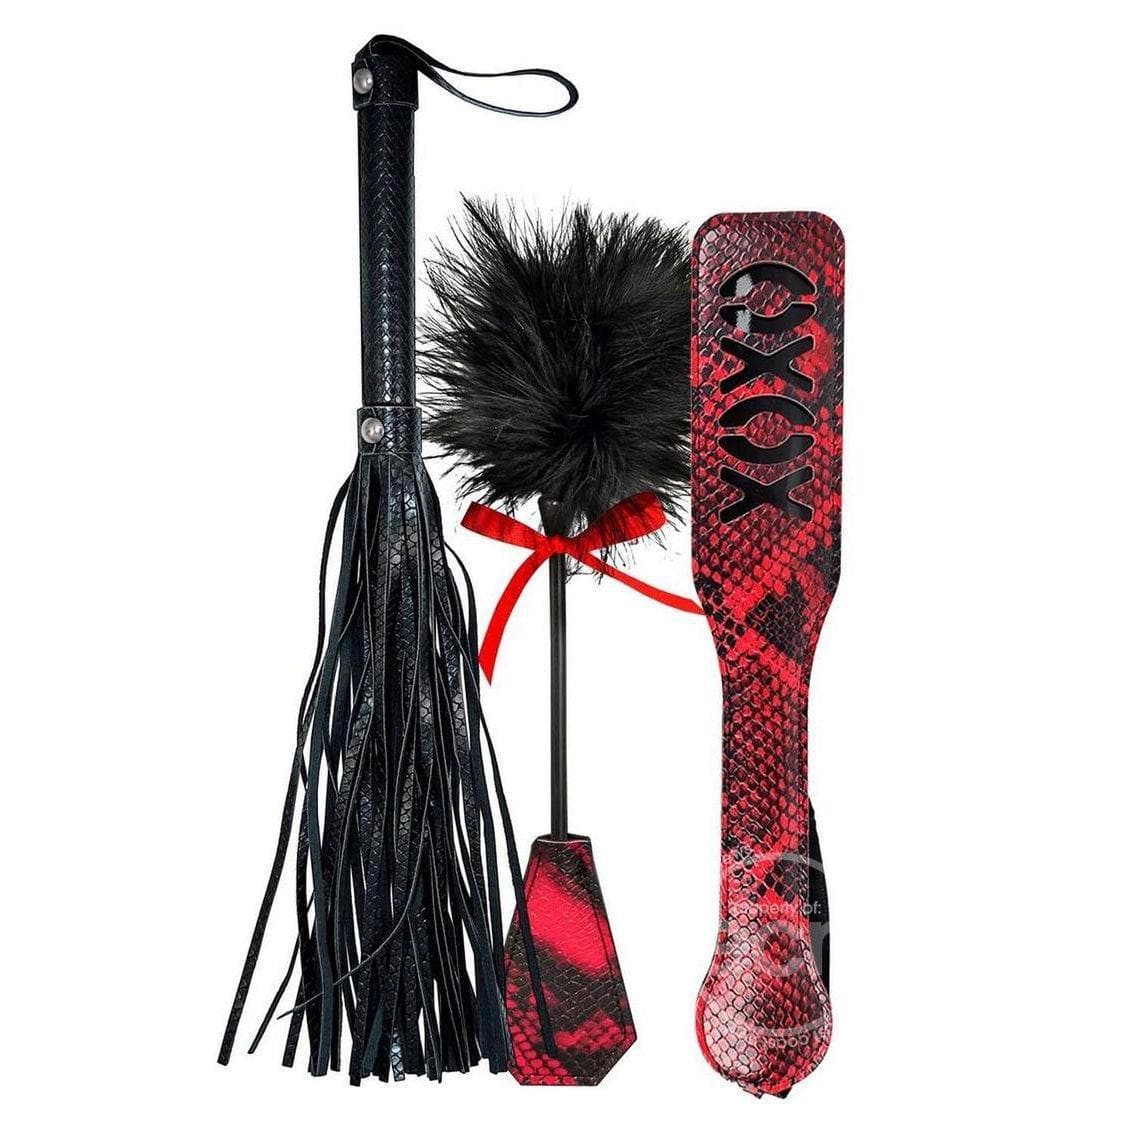 Lovers Kits Whip, Tickle & Paddle - Black/Red - Romantic Blessings